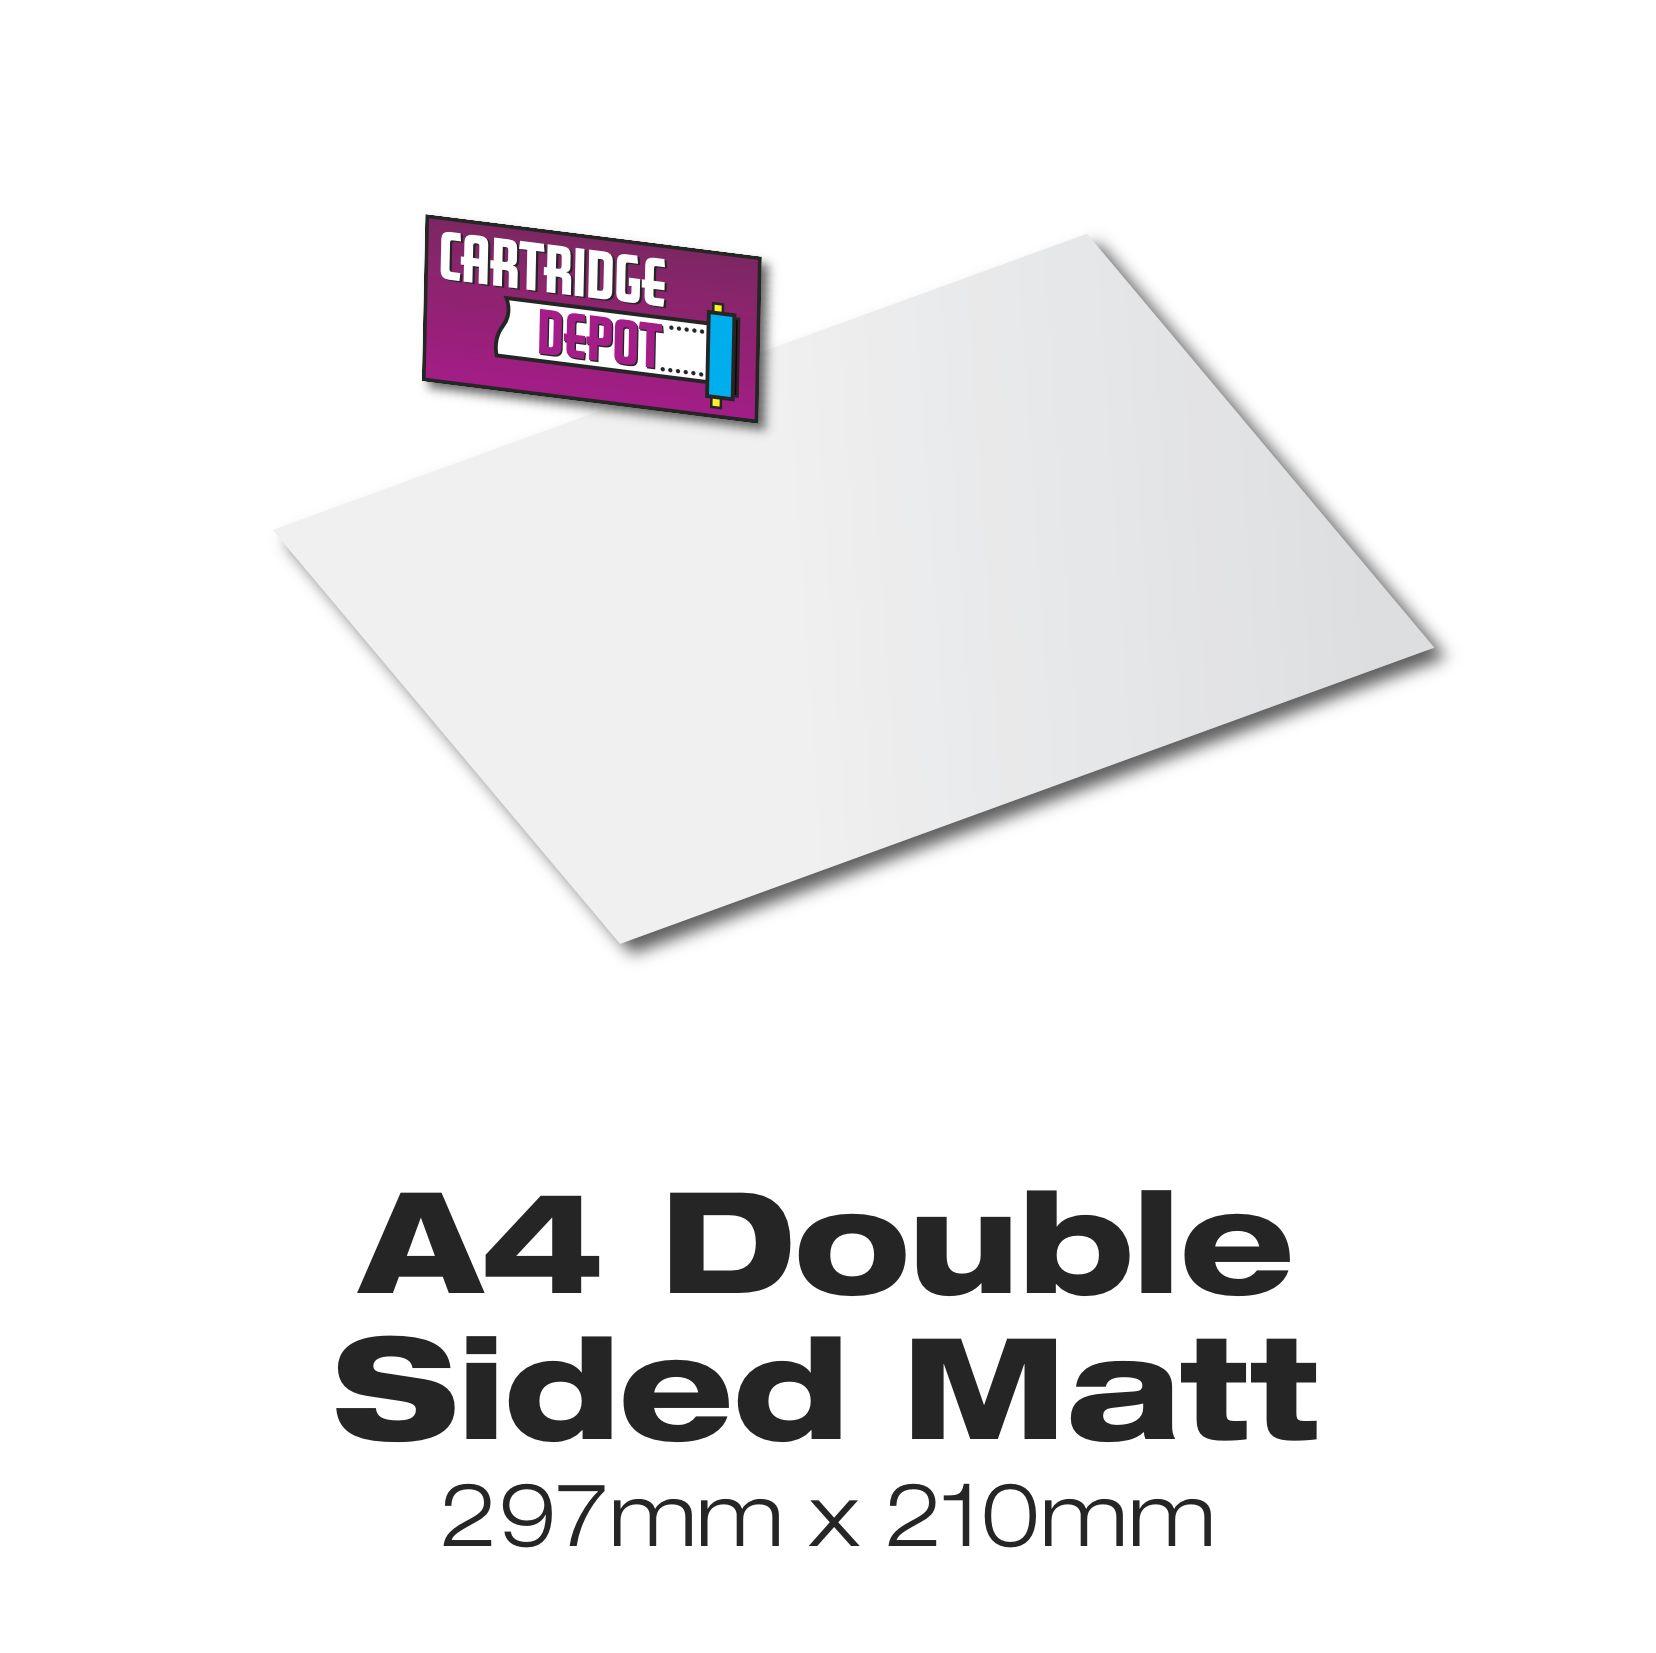 Double sided photographic paper